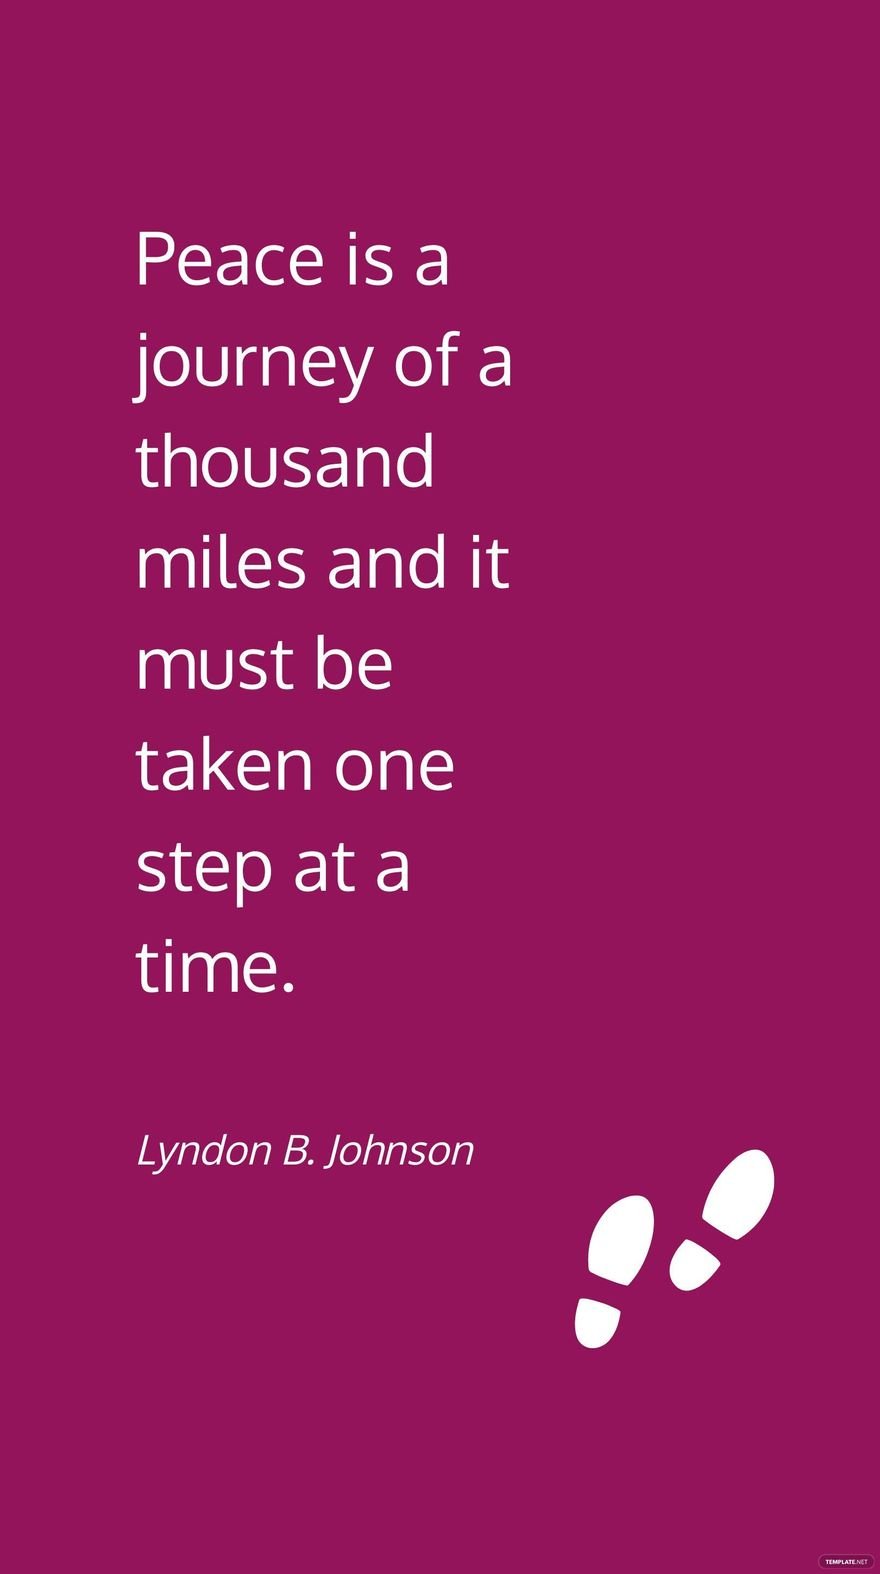 Free Lyndon B. Johnson - Peace is a journey of a thousand miles and it must be taken one step at a time. in JPG